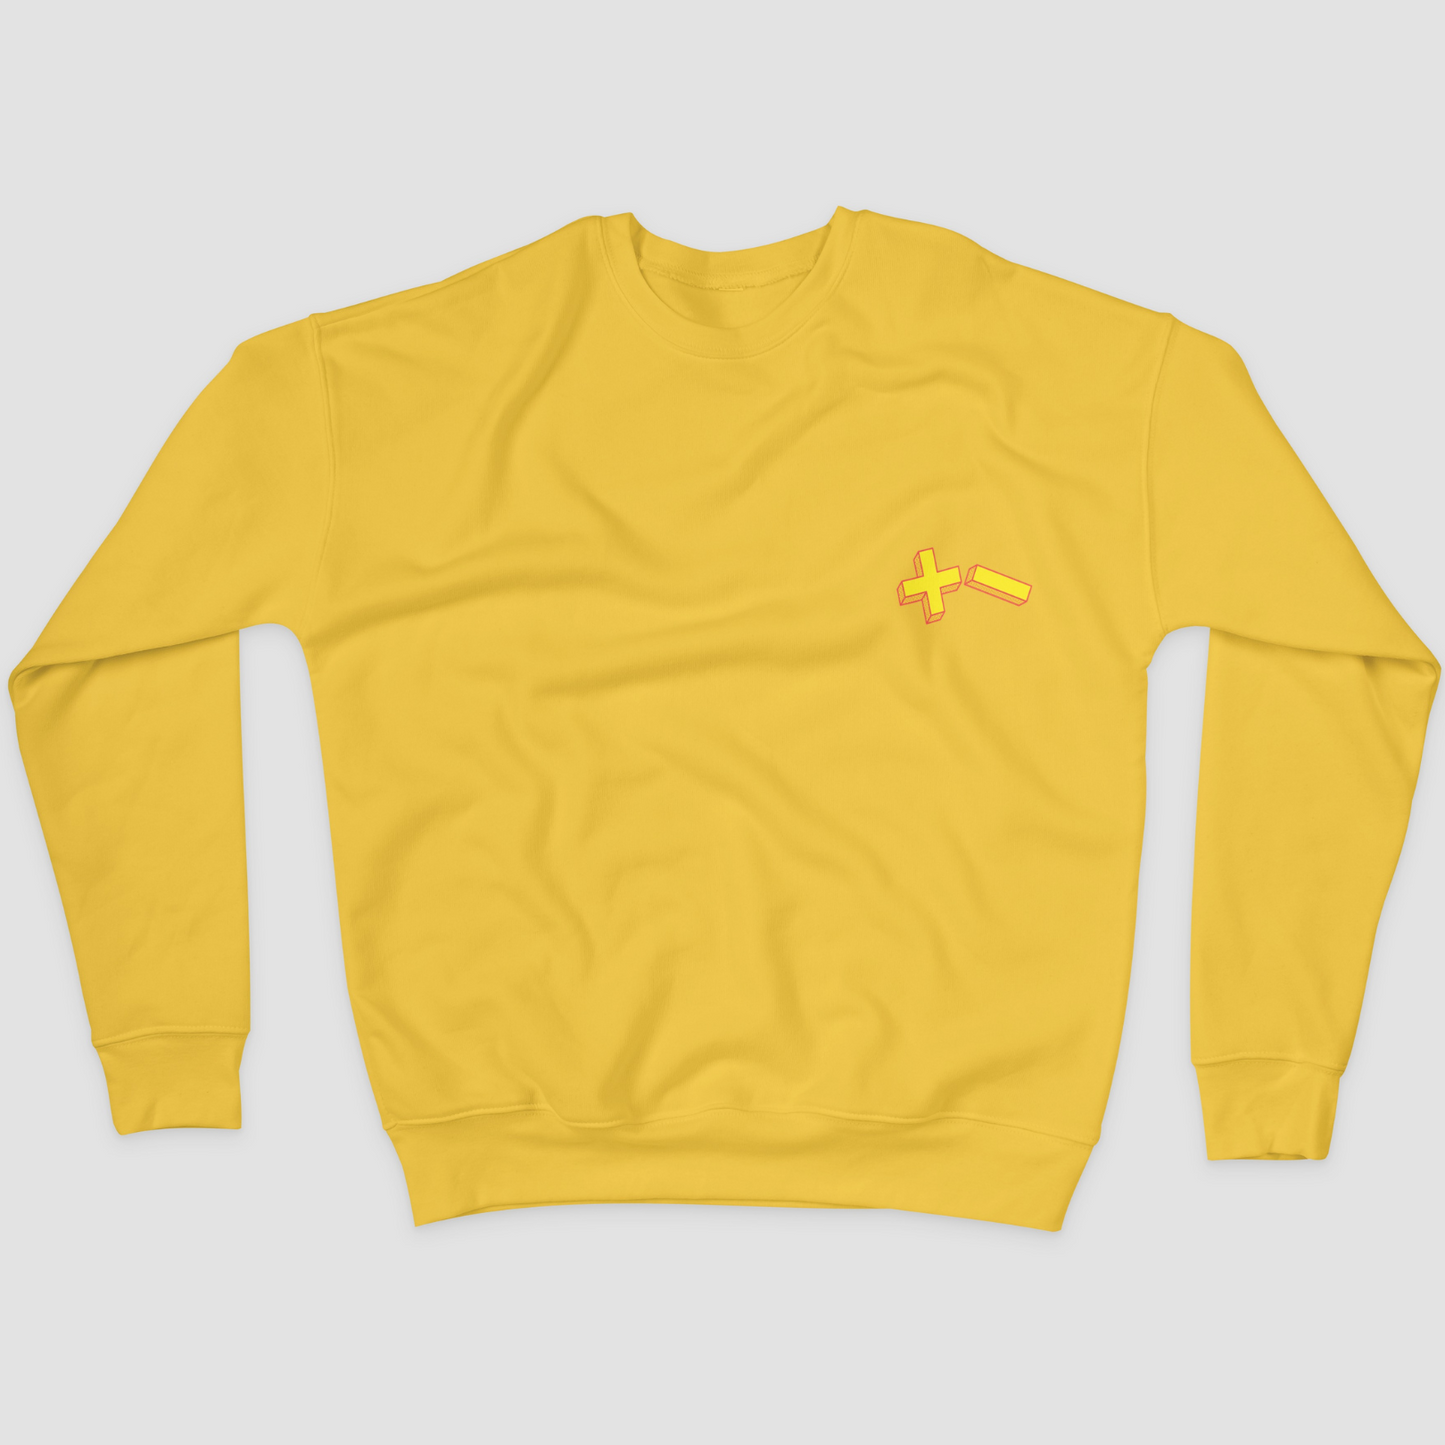 Electrify or Die Sweatshirt / Pigment Dyed Yellow